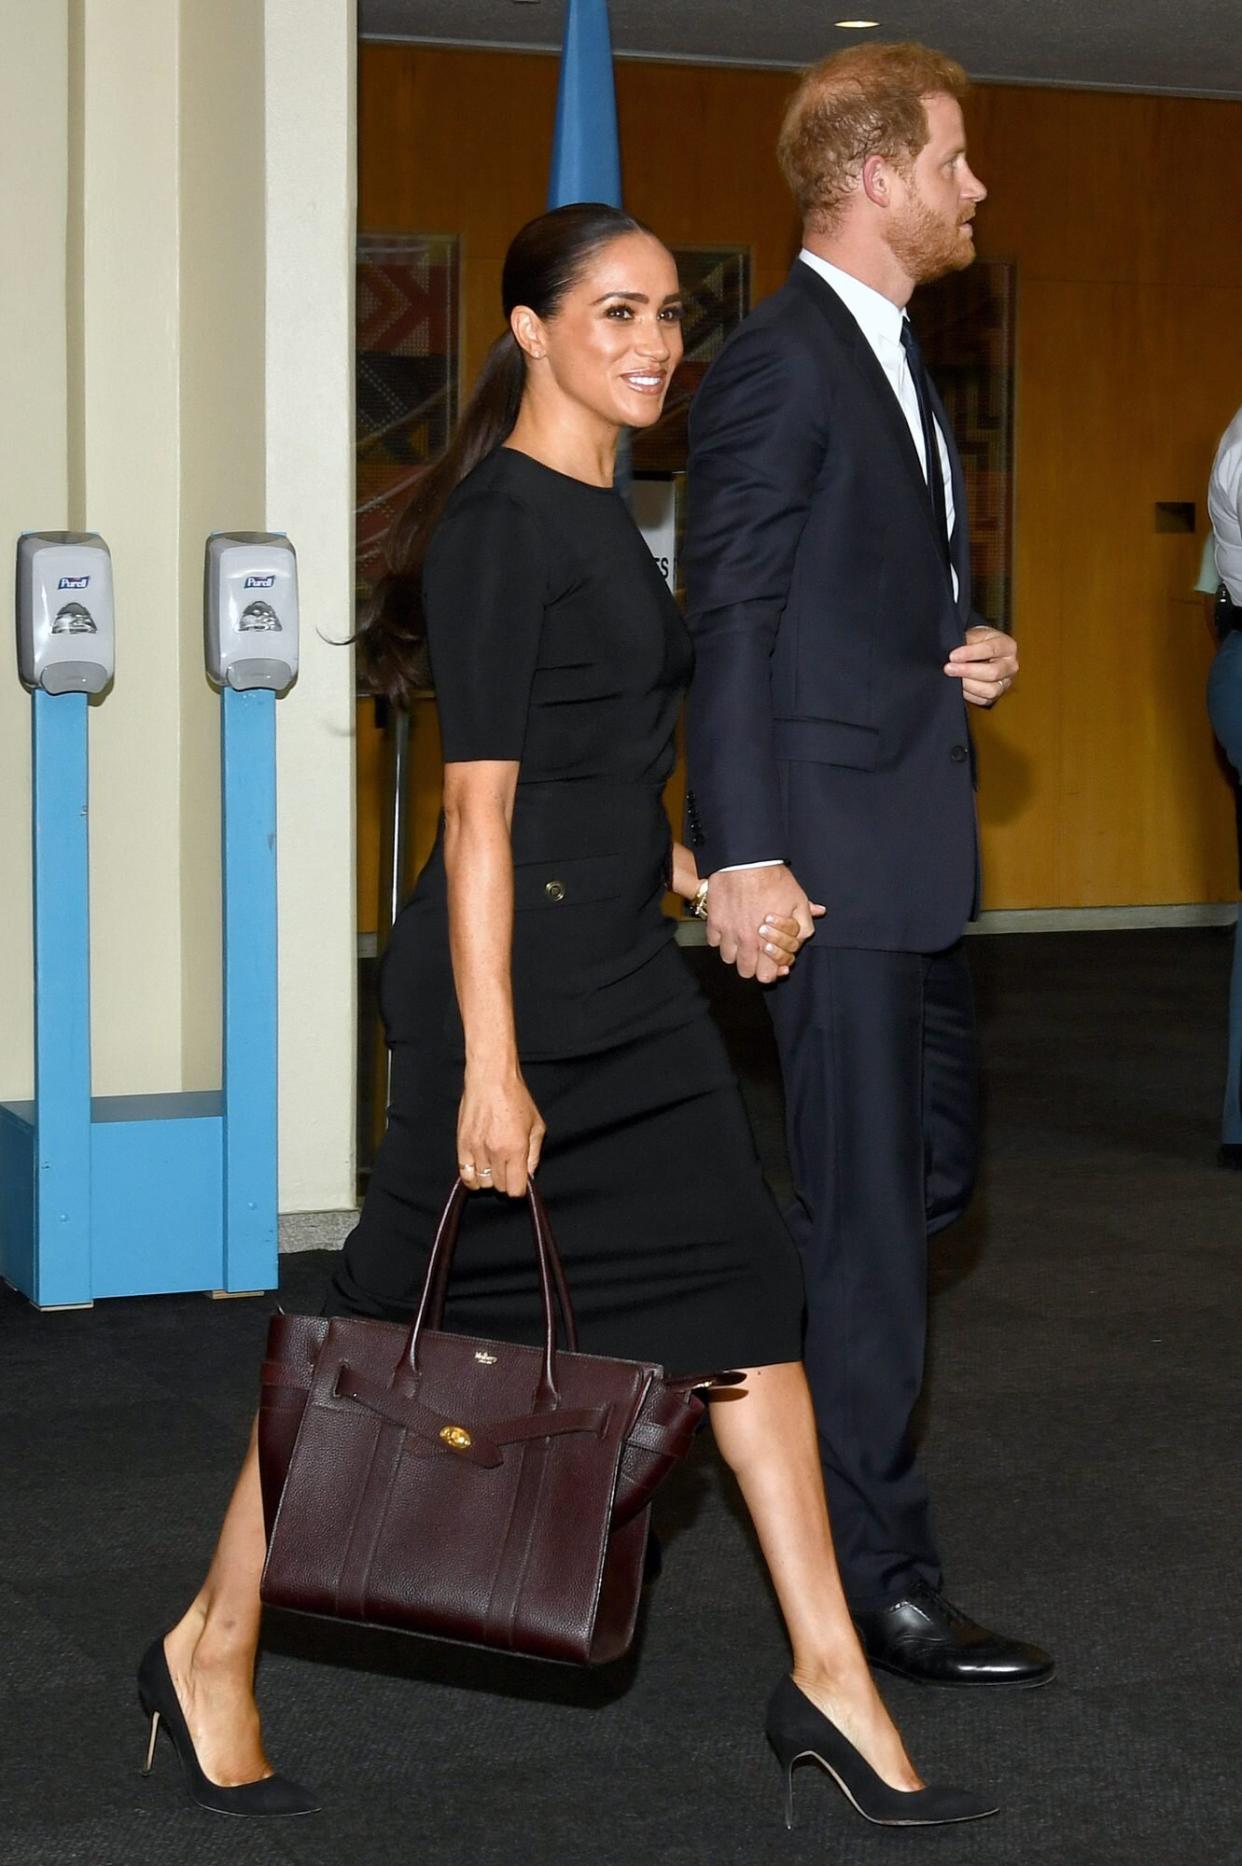 Prince Harry, Duke of Sussex, and wife Meghan Markle, Duchess of Sussex, arrive at the U.N. to attend the Nelson Mandela International Day ceremony held at the United Nations in New York City, NY on Monday, July 18, 2022. (Photo by Anthony Behar/Sipa USA)